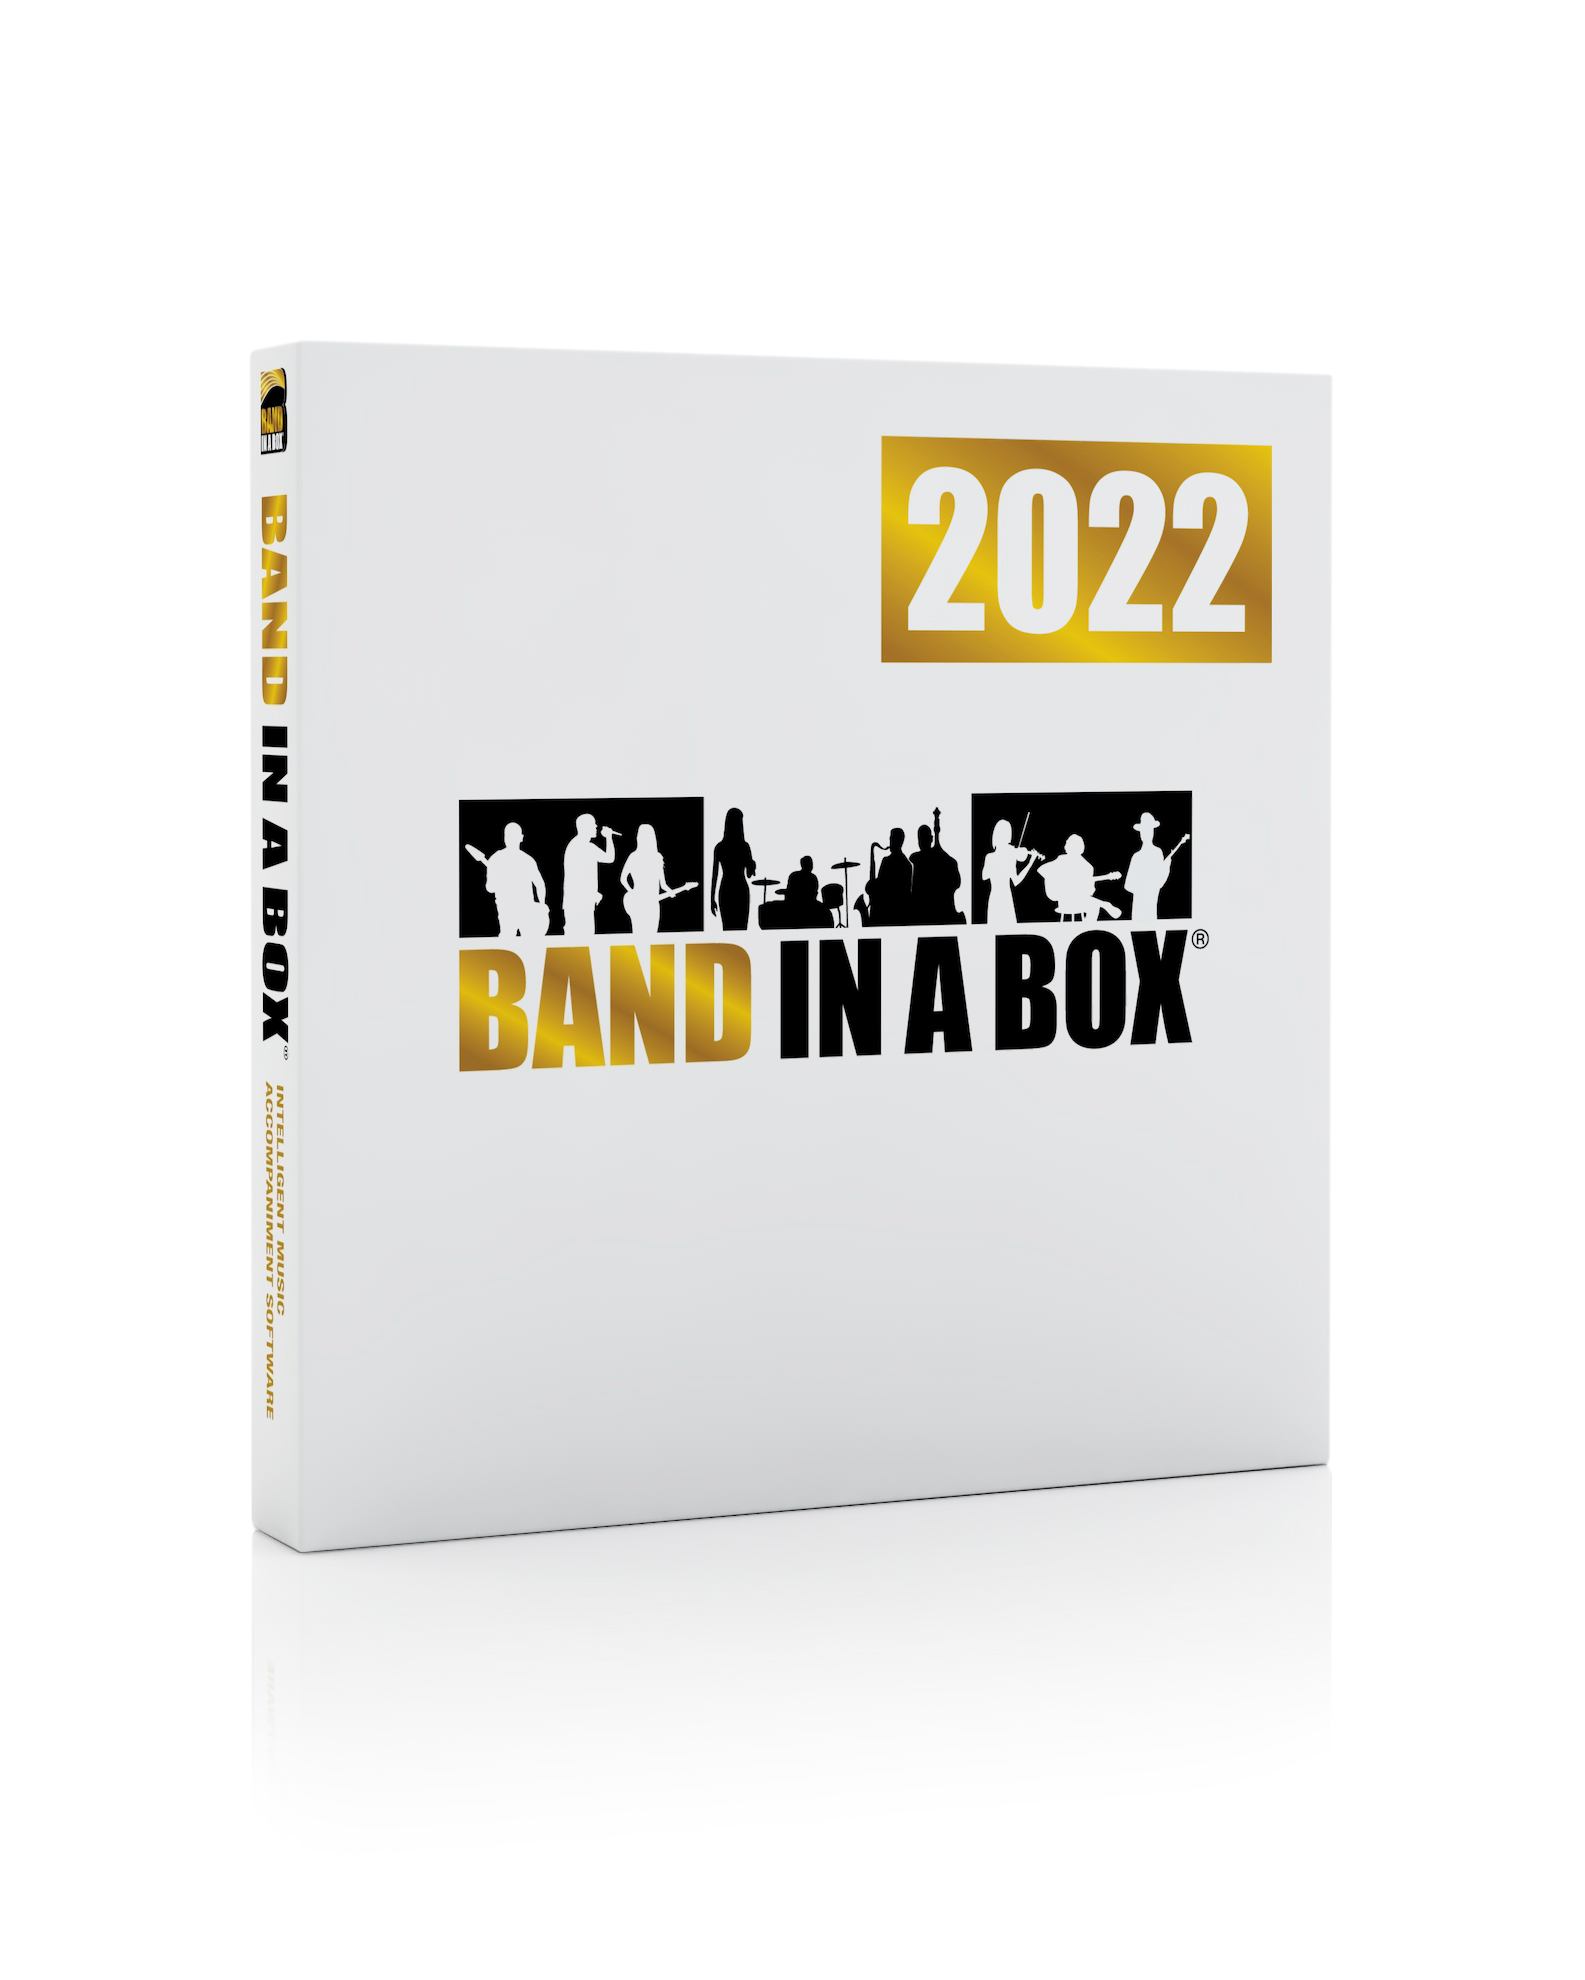 PG Music Band-in-a-Box 2020 Megapak BBE02645 Win Usbflash Drive PG Music Inc